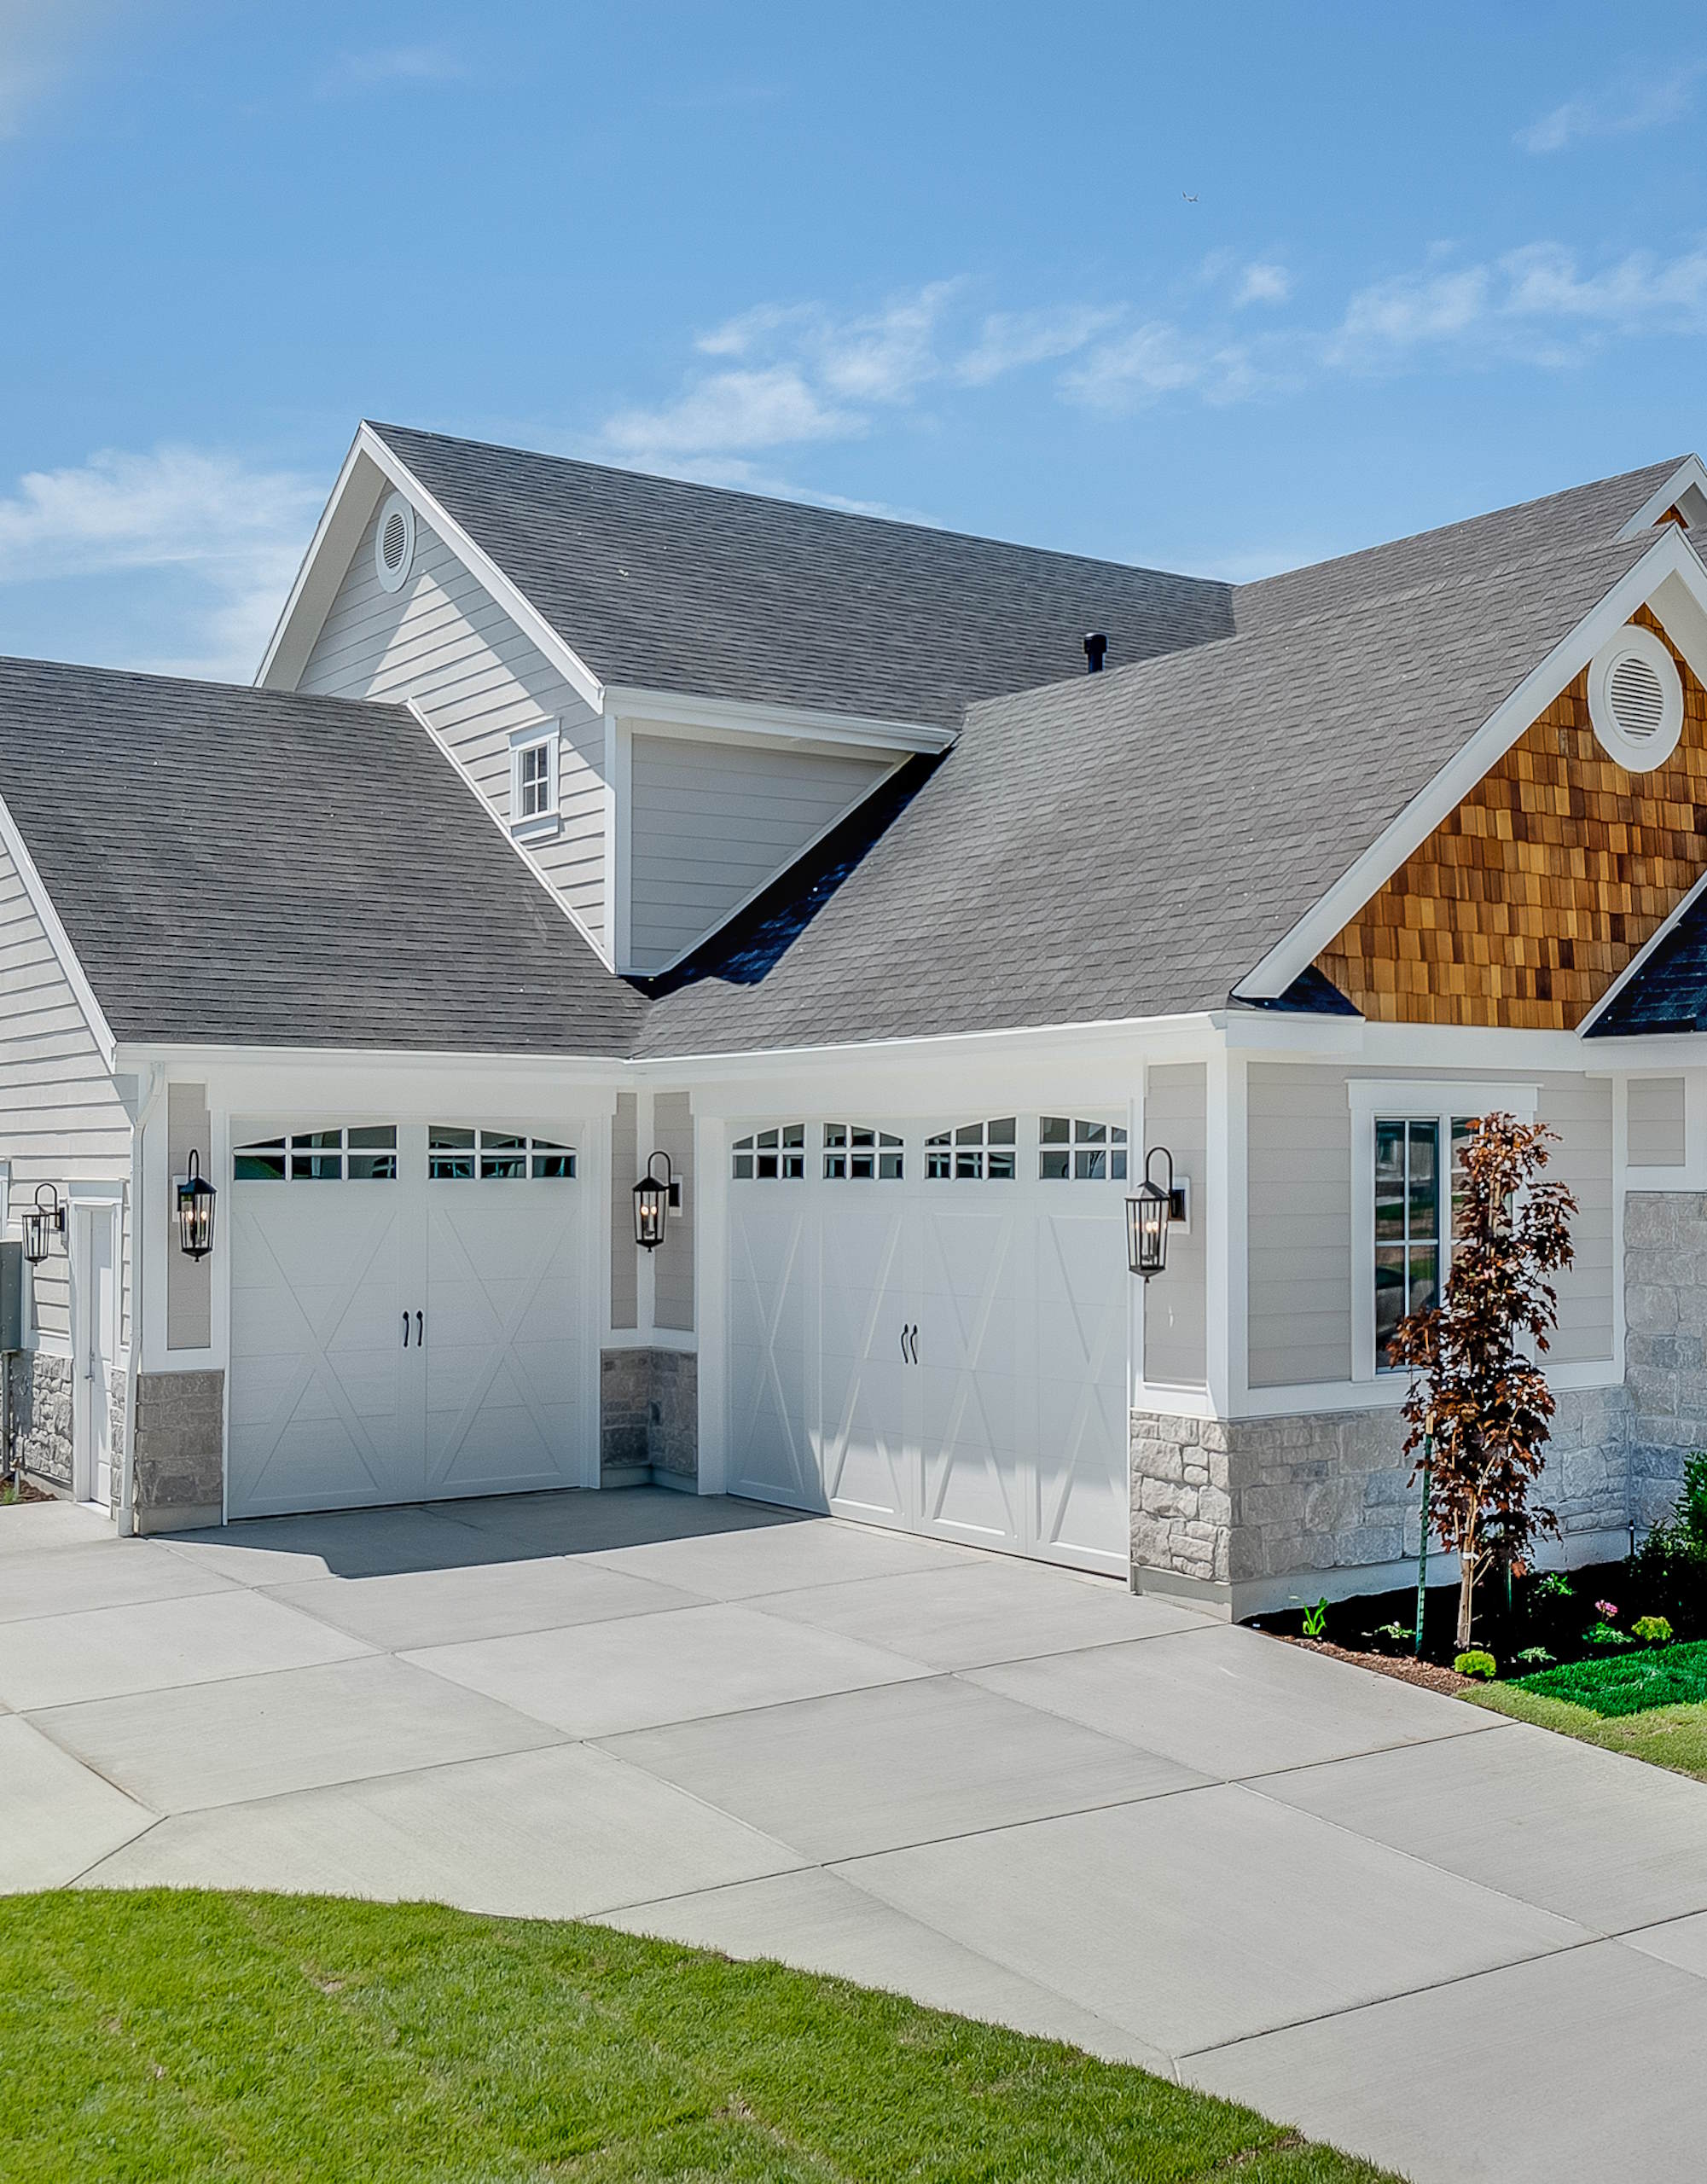 House with 2 carriage style garage doors